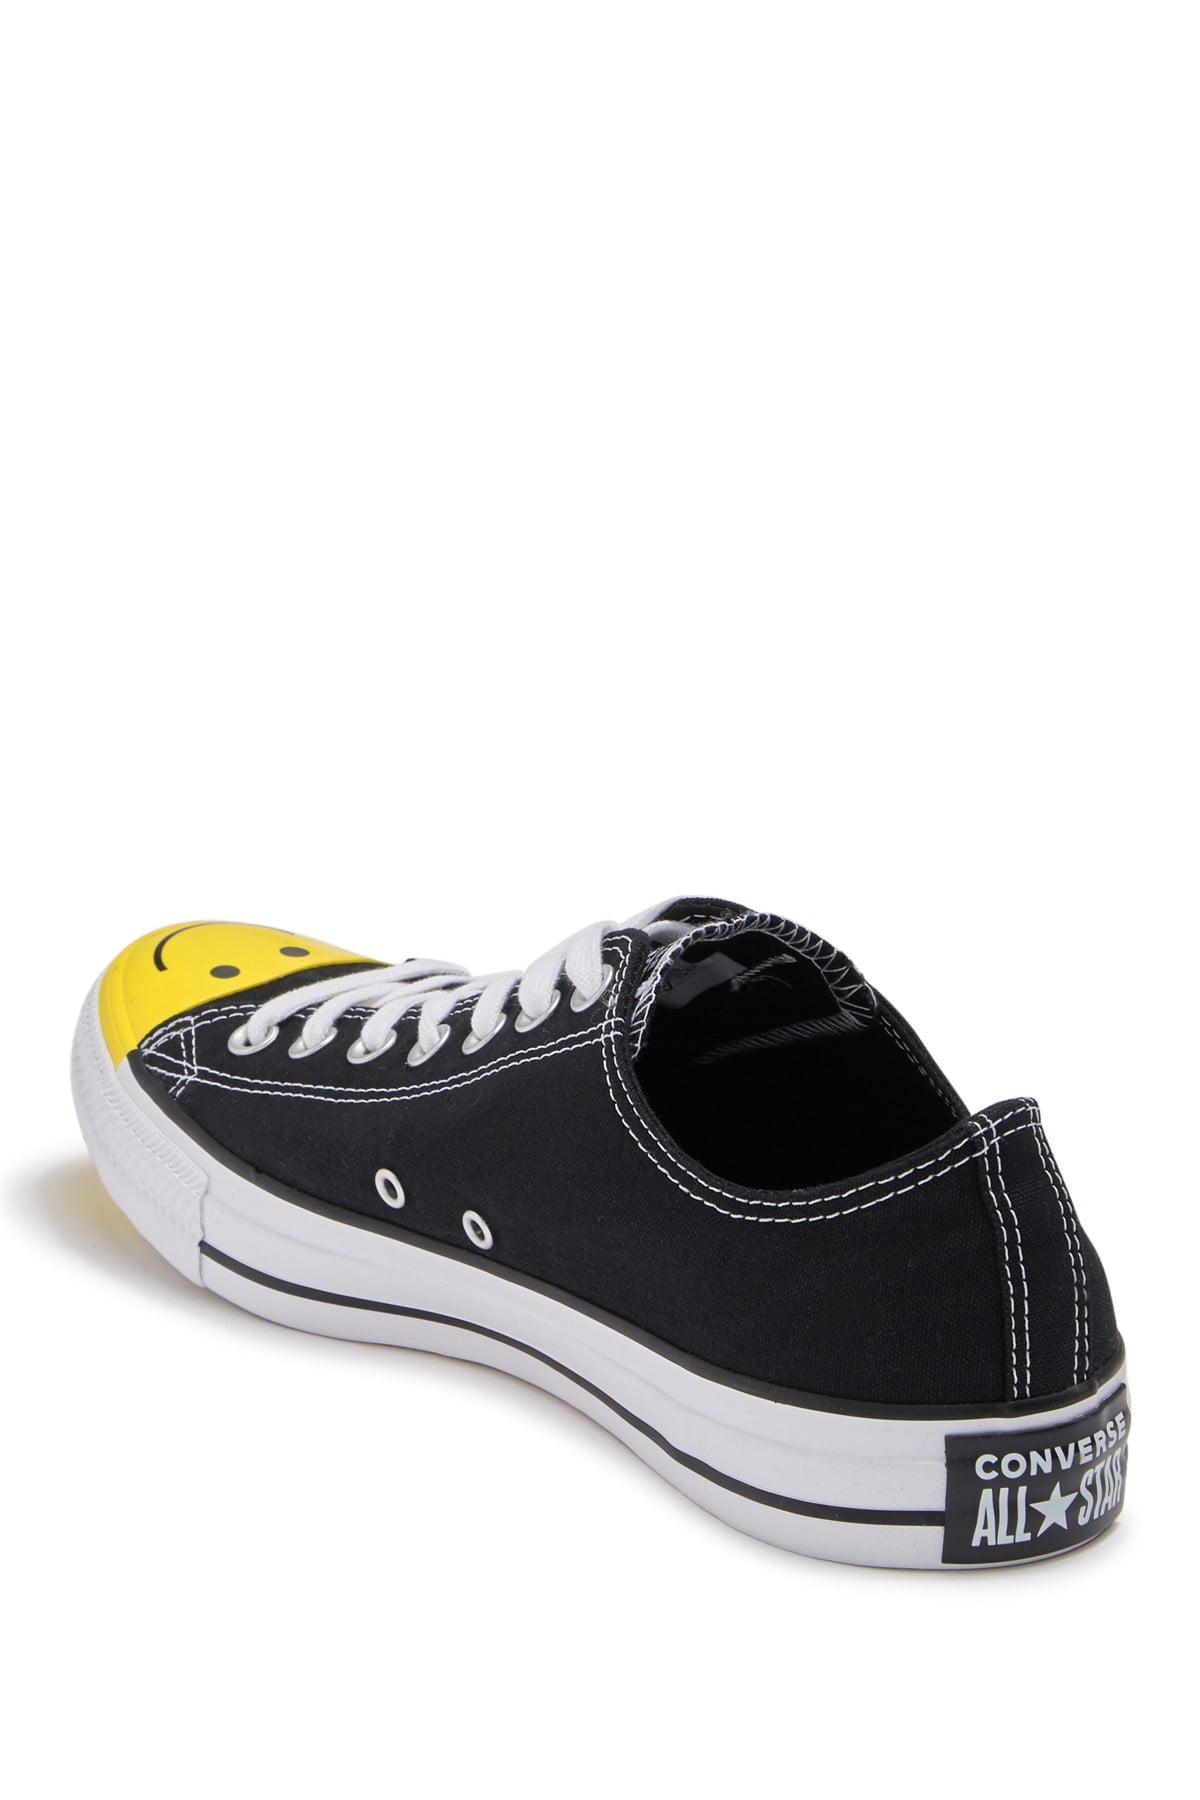 forvrængning Specialisere Erobring Converse Chuck Taylor All Star Ox Yellow Smiley Face Toe Low Top Sneaker in  Black for Men | Lyst